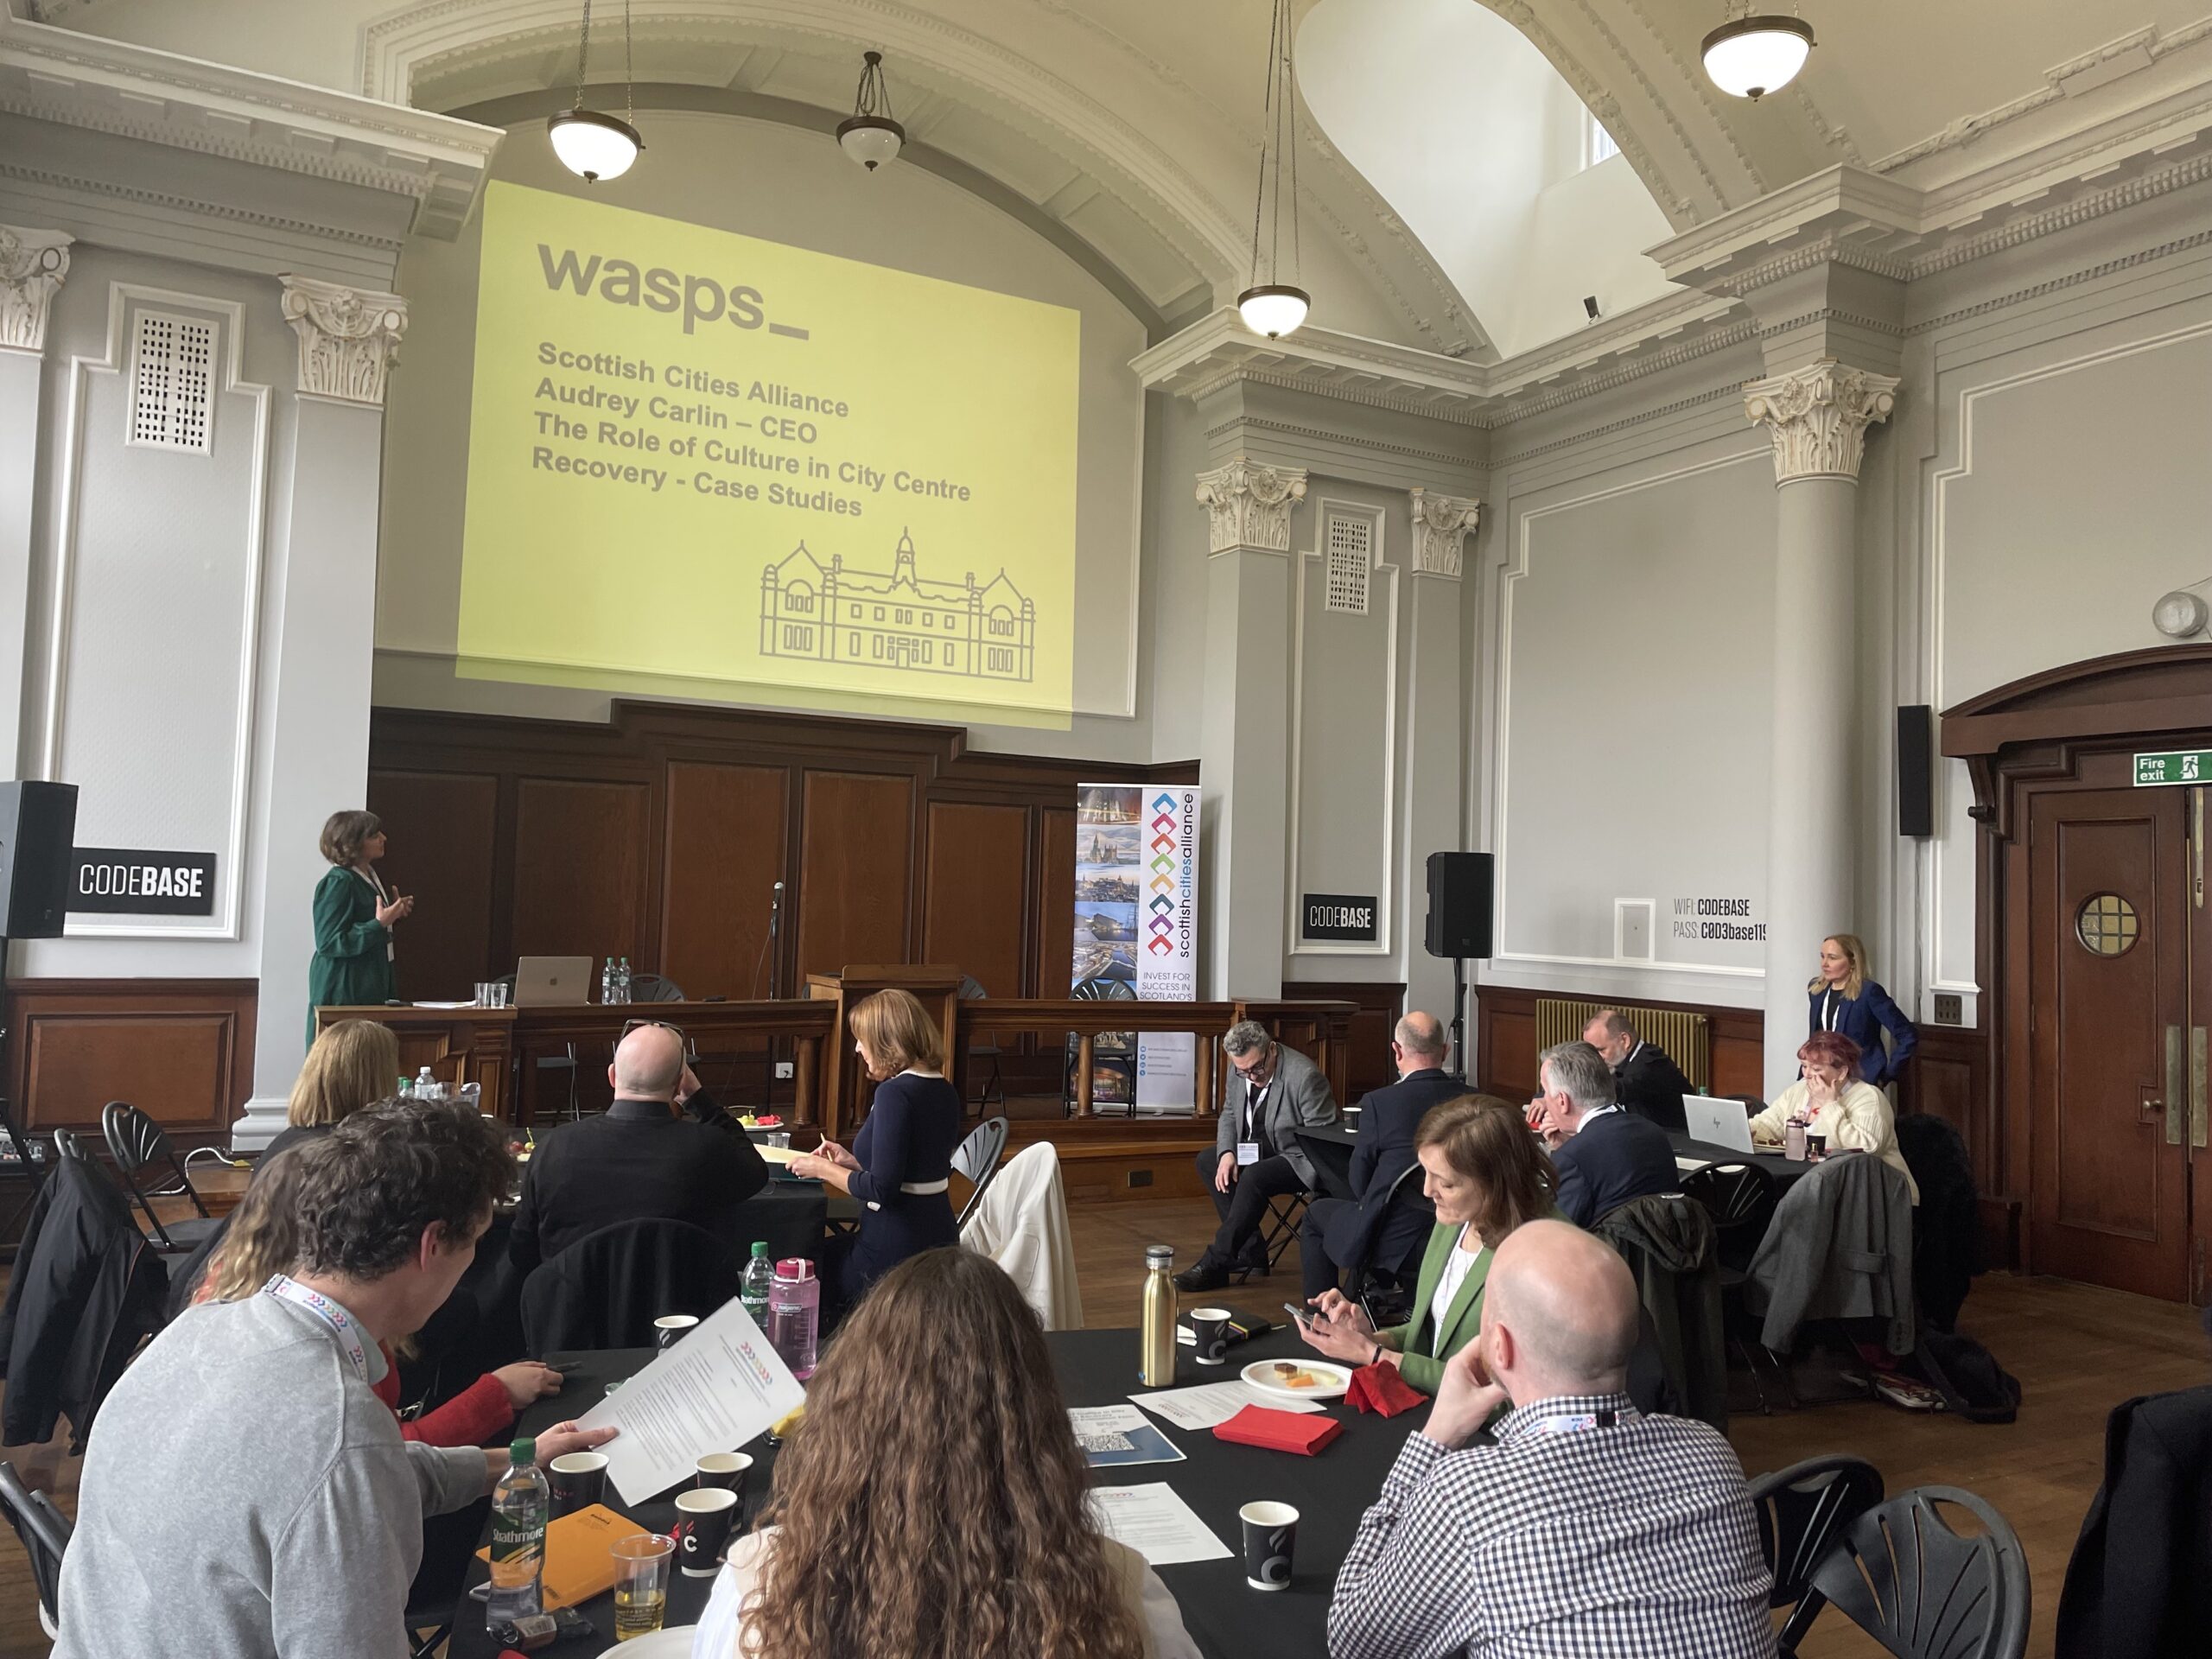 Audrey Carlin, CEO of Wasps, presenting on the role of creative studio space to foster creativity